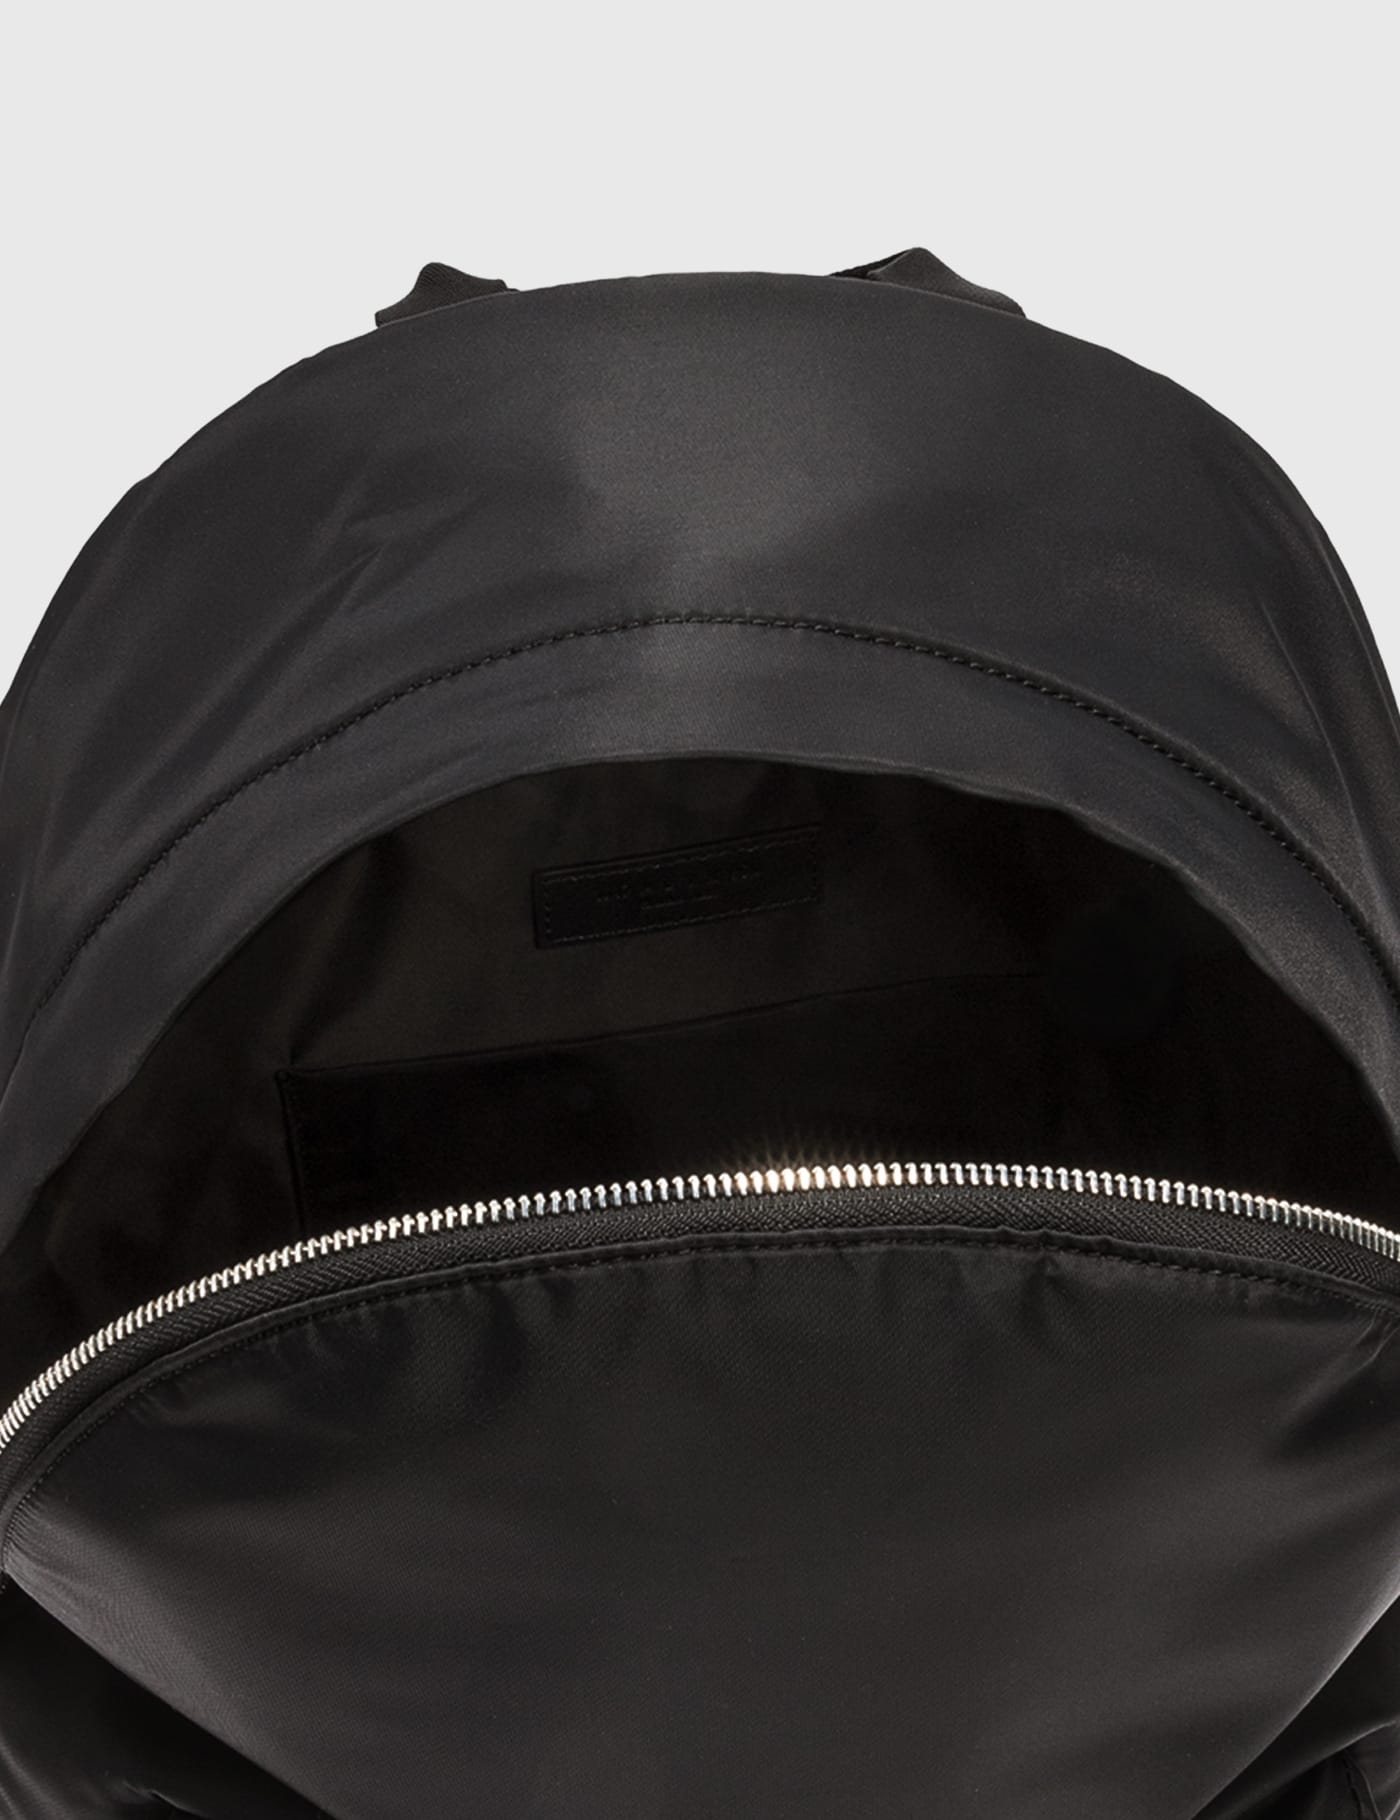 1017 ALYX 9SM - Tricon Backpack | HBX - Globally Curated Fashion 